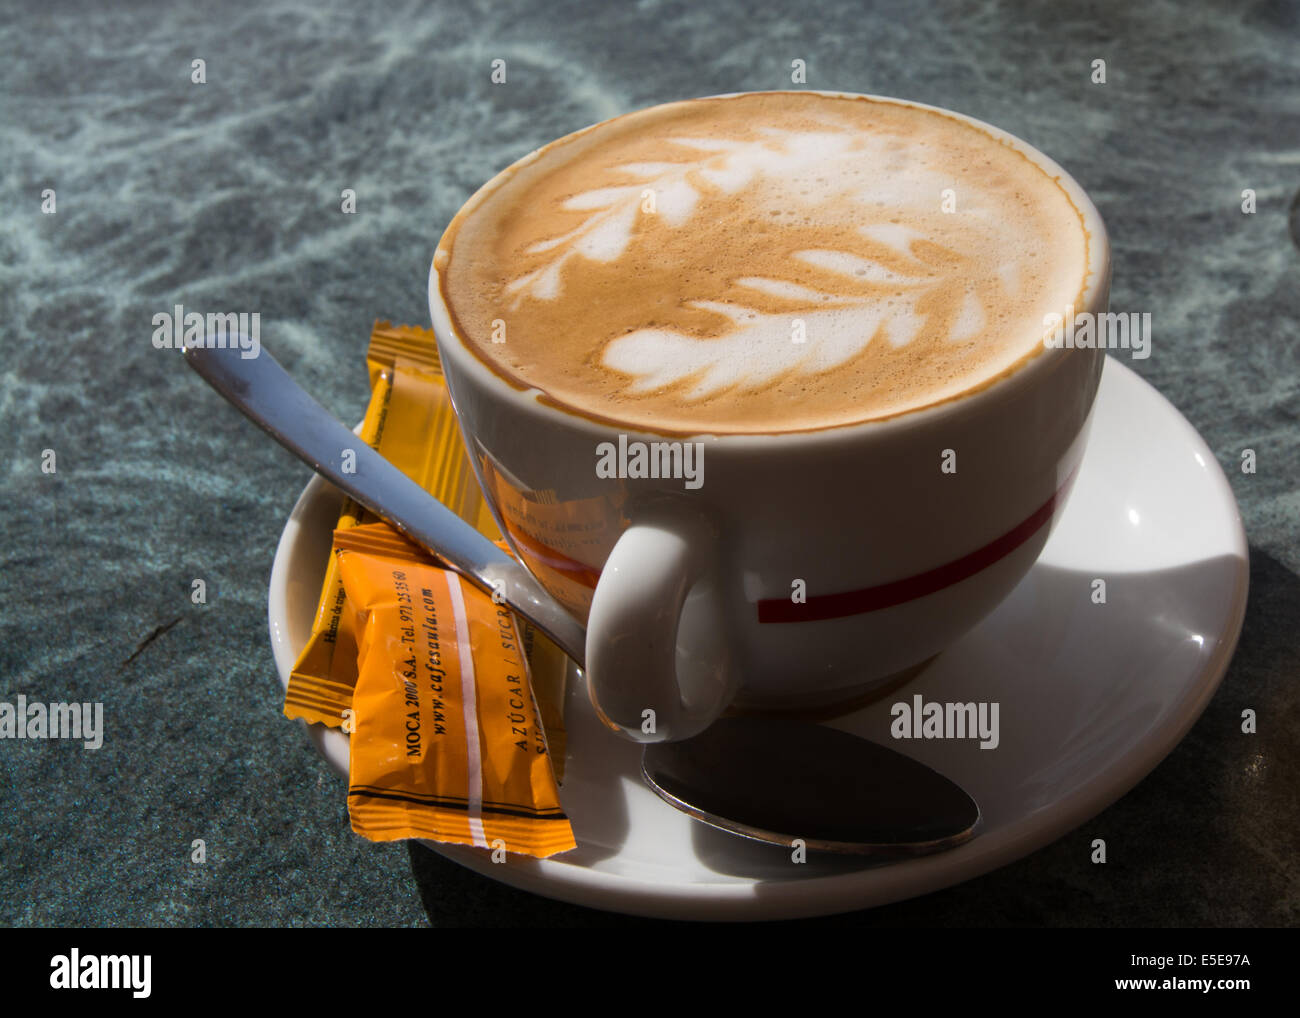 Cafe con leche with pattern and sugar or cookies contained in wrap. Stock Photo